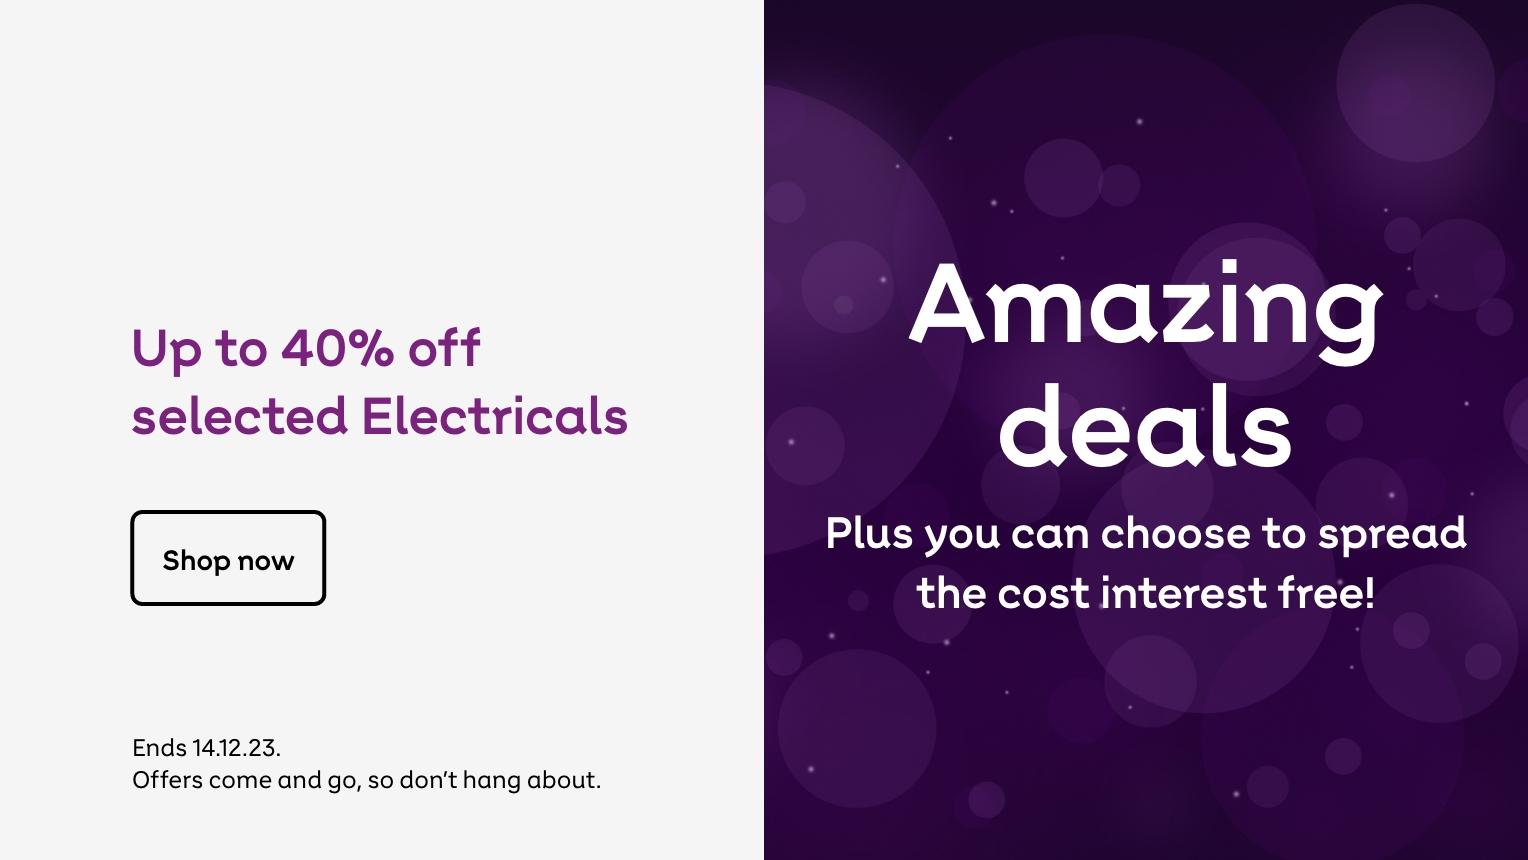 Up to 30% off selected Electricals. Shop now